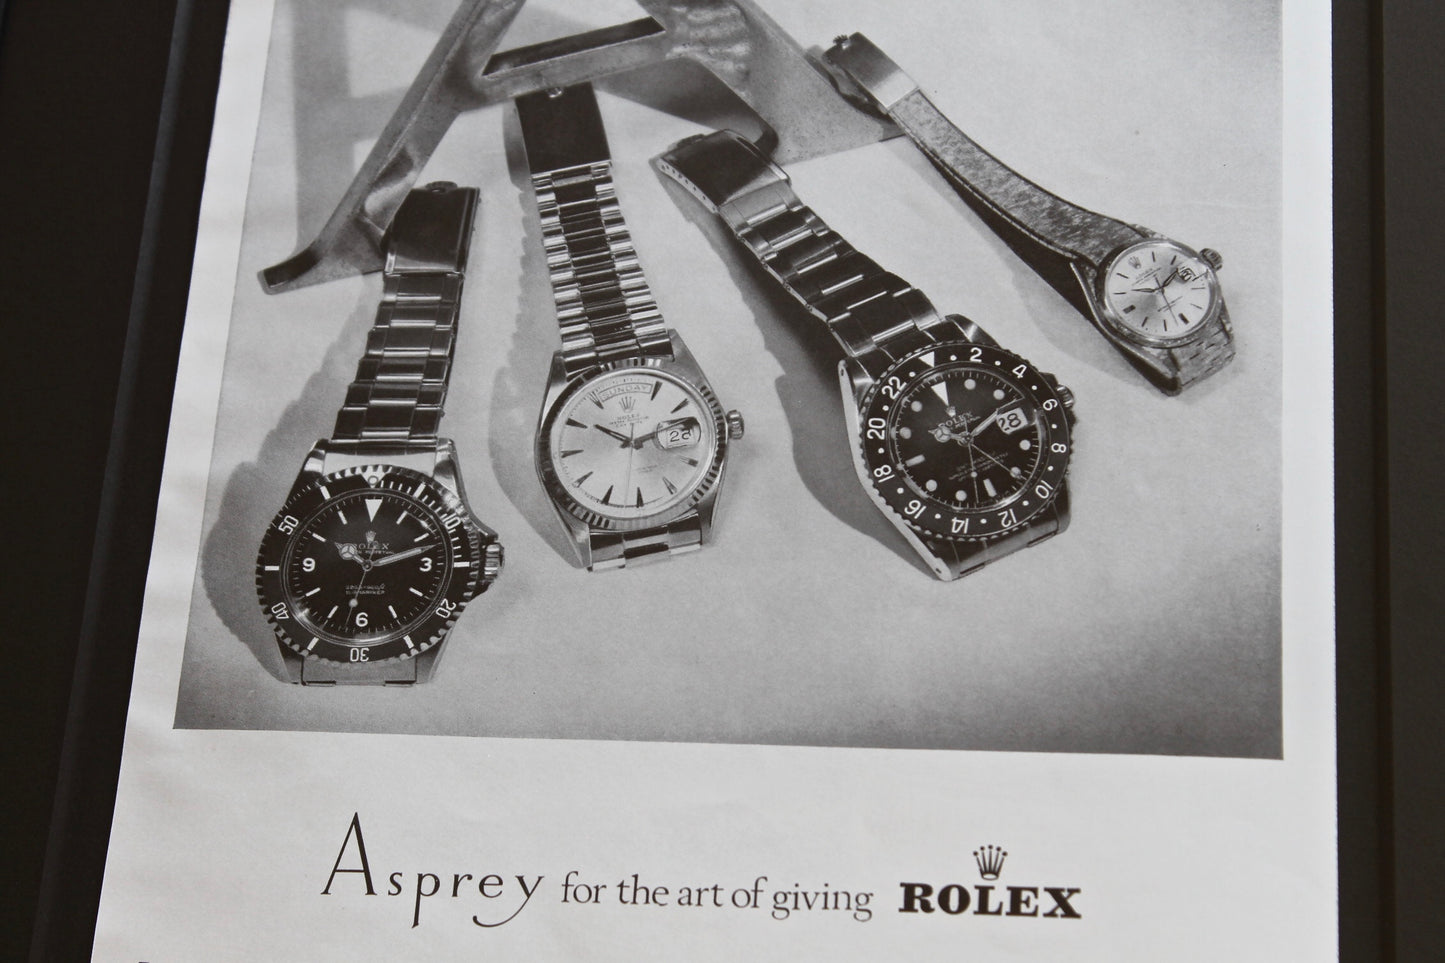 Rolex By Asprey 'The Art Of Giving'